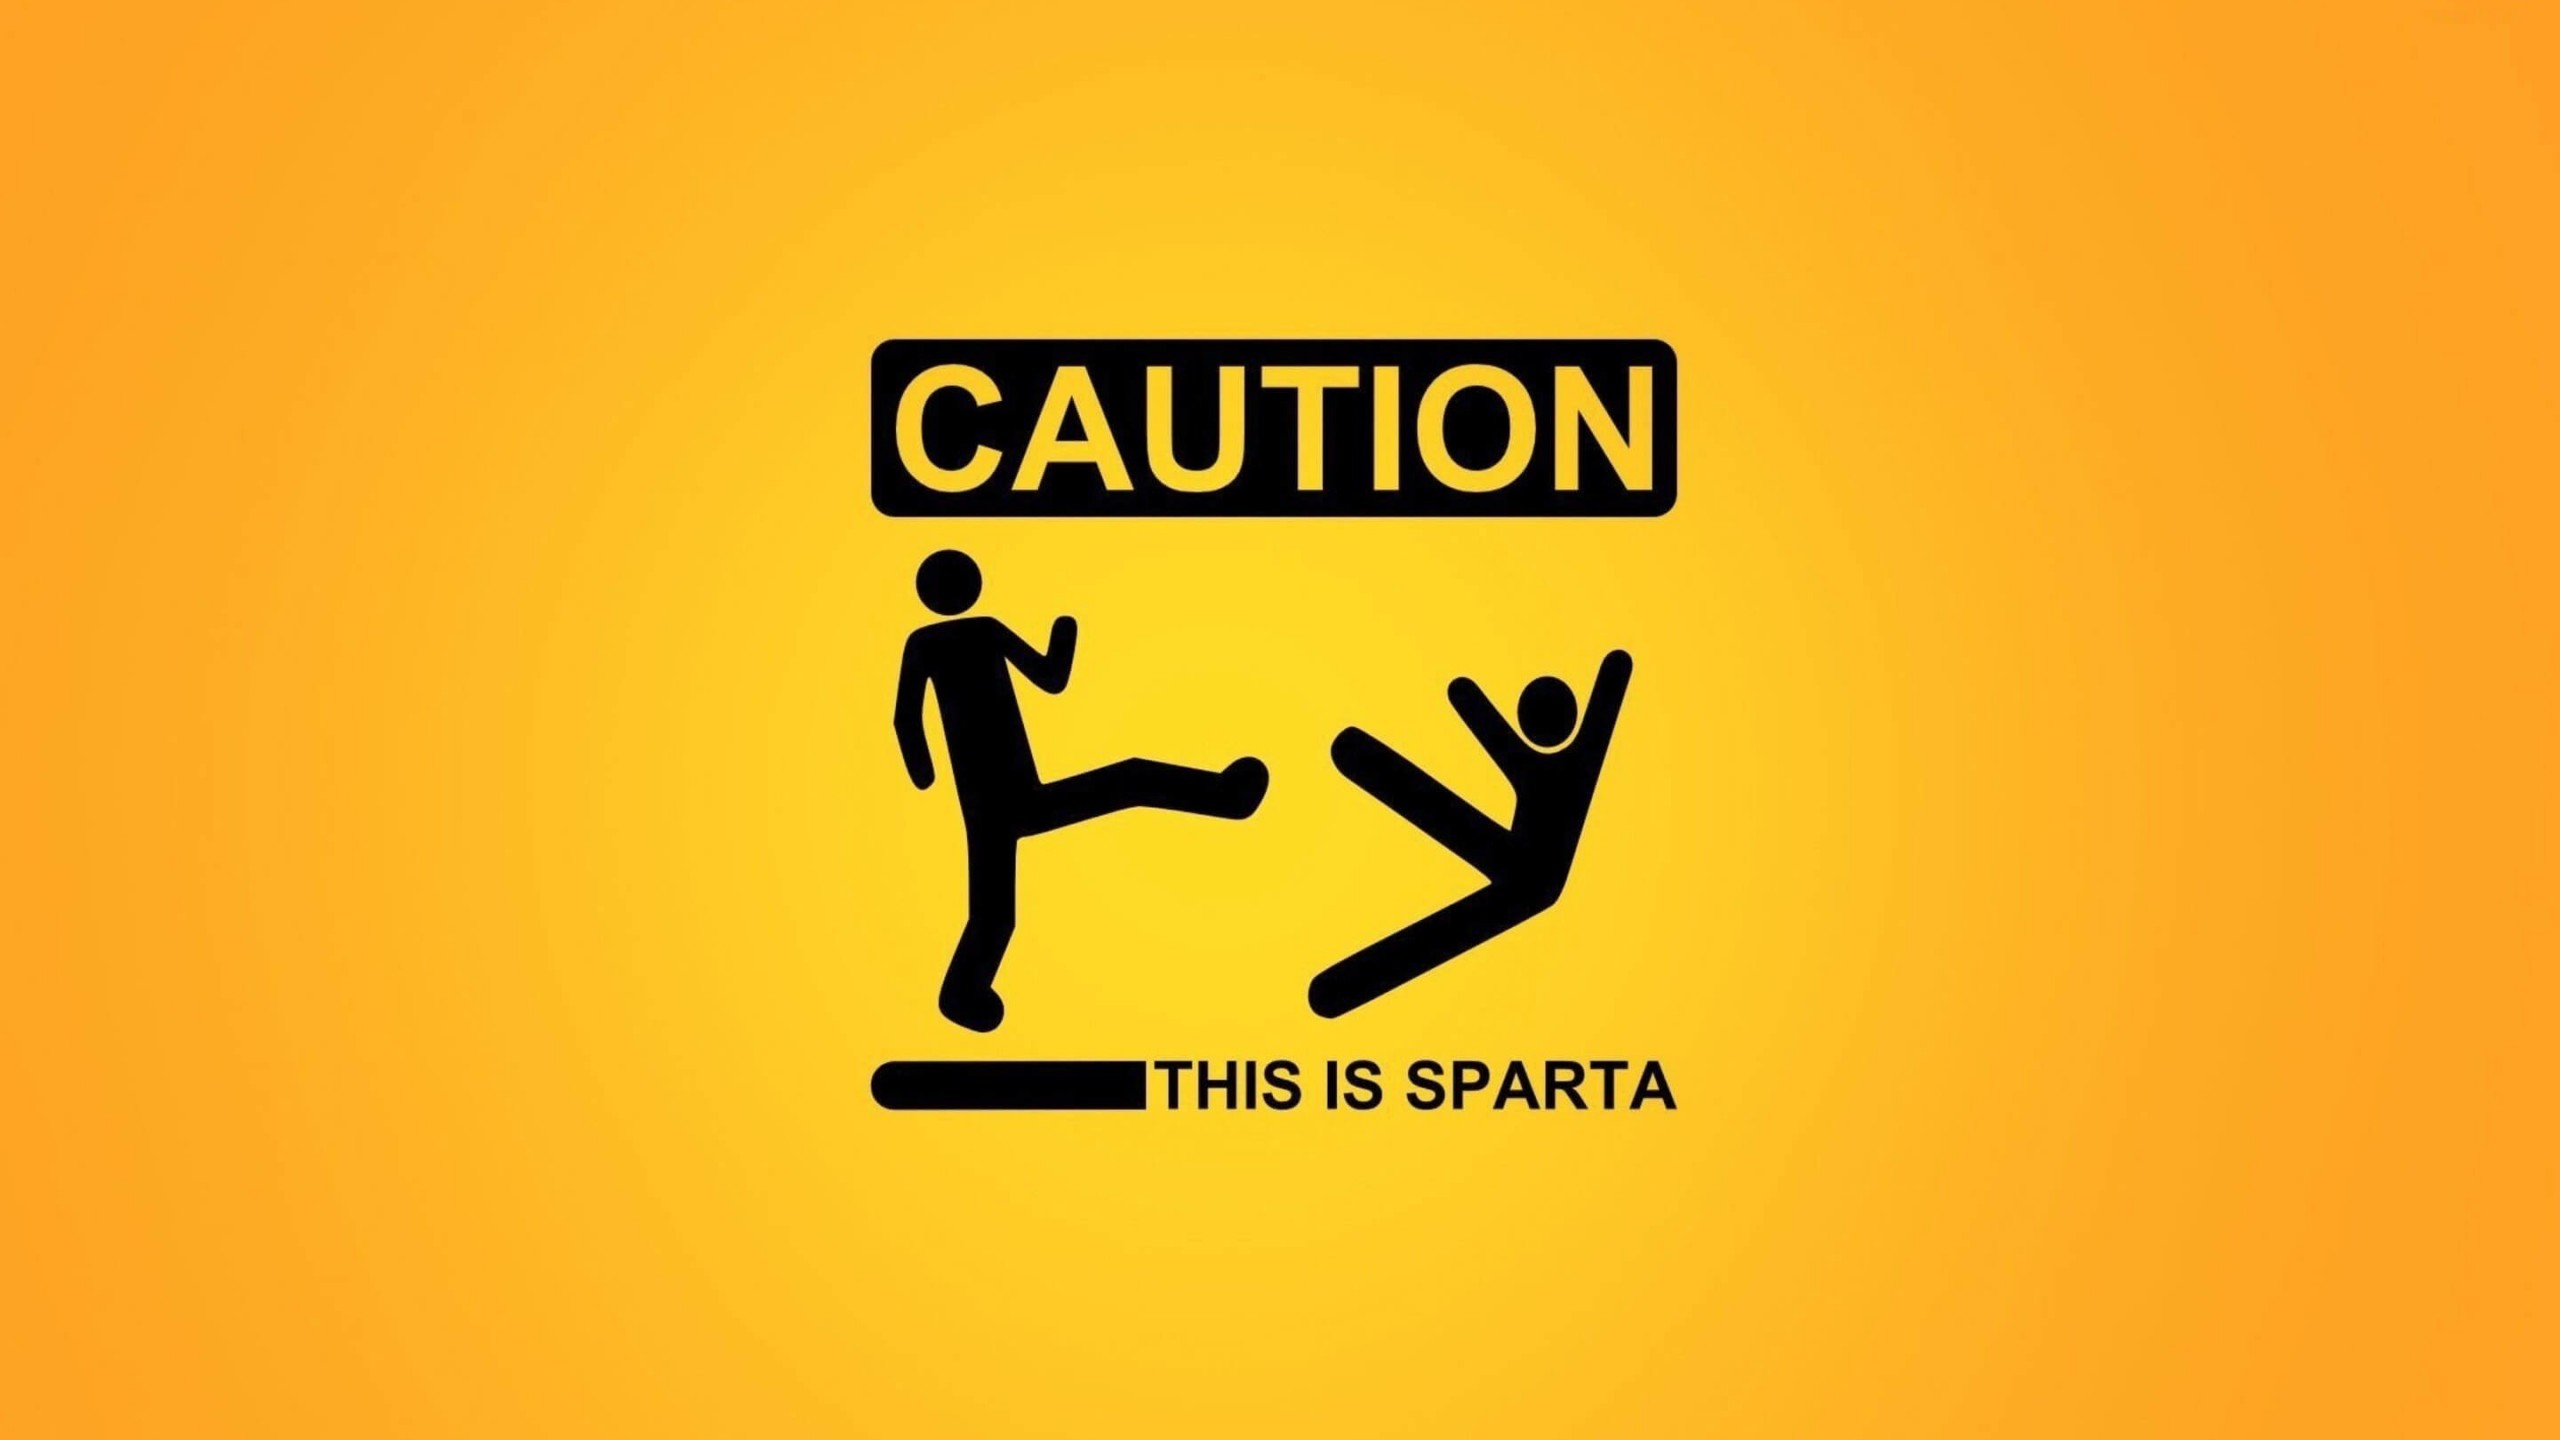 Caution: This Is Sparta! Wallpaper for Social Media YouTube Channel Art